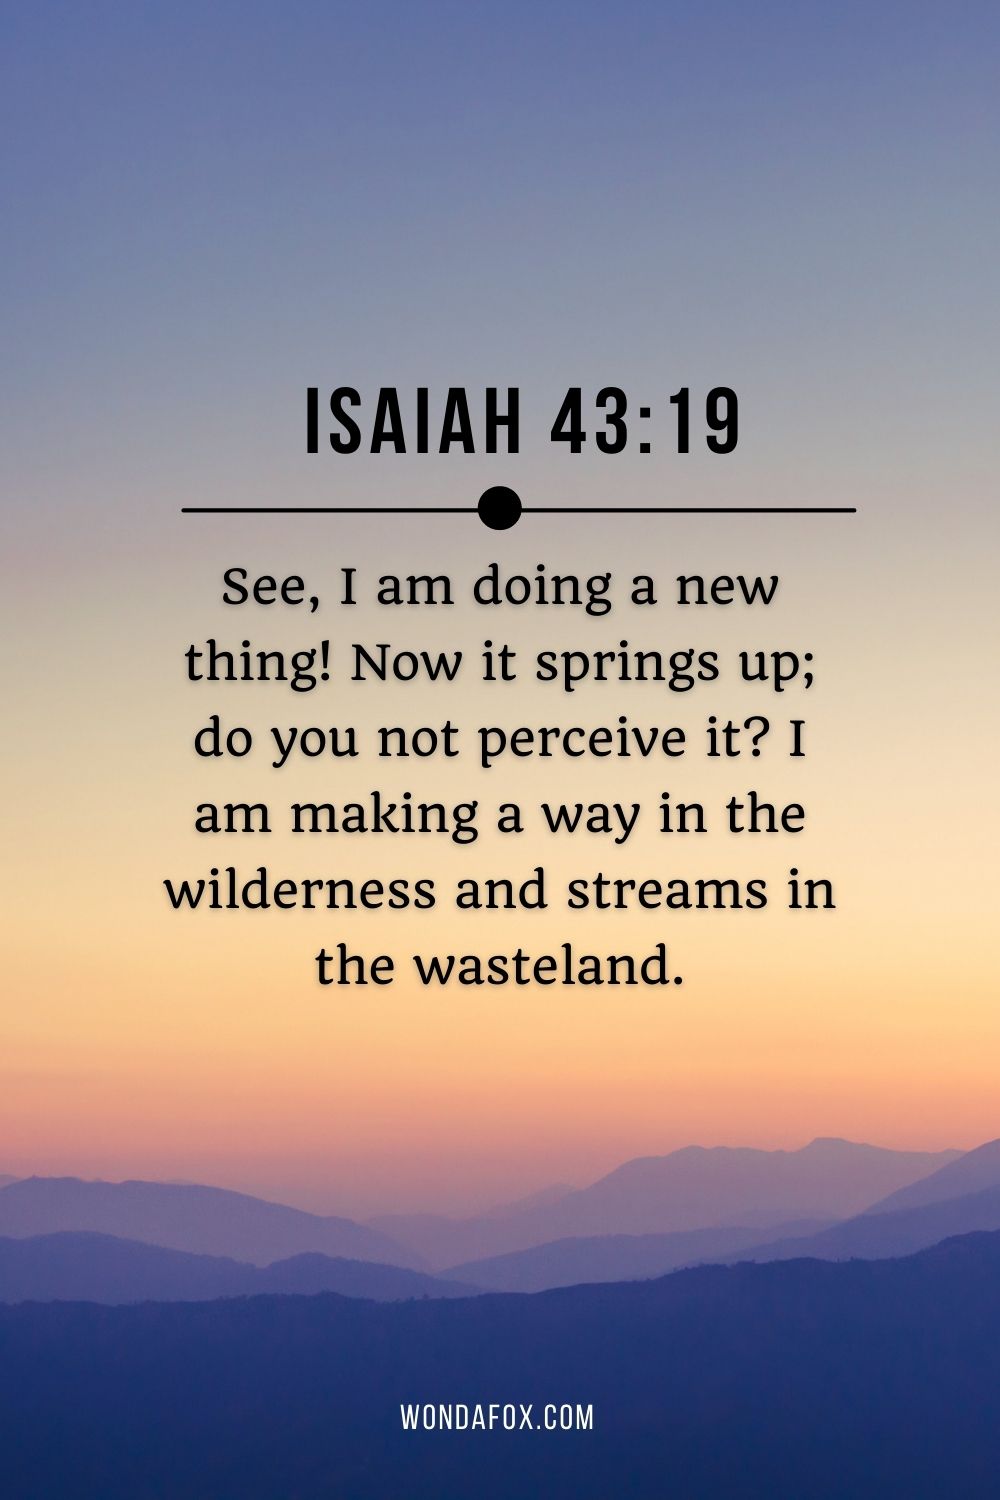 See, I am doing a new thing! Now it springs up; do you not perceive it? I am making a way in the wilderness and streams in the wasteland.